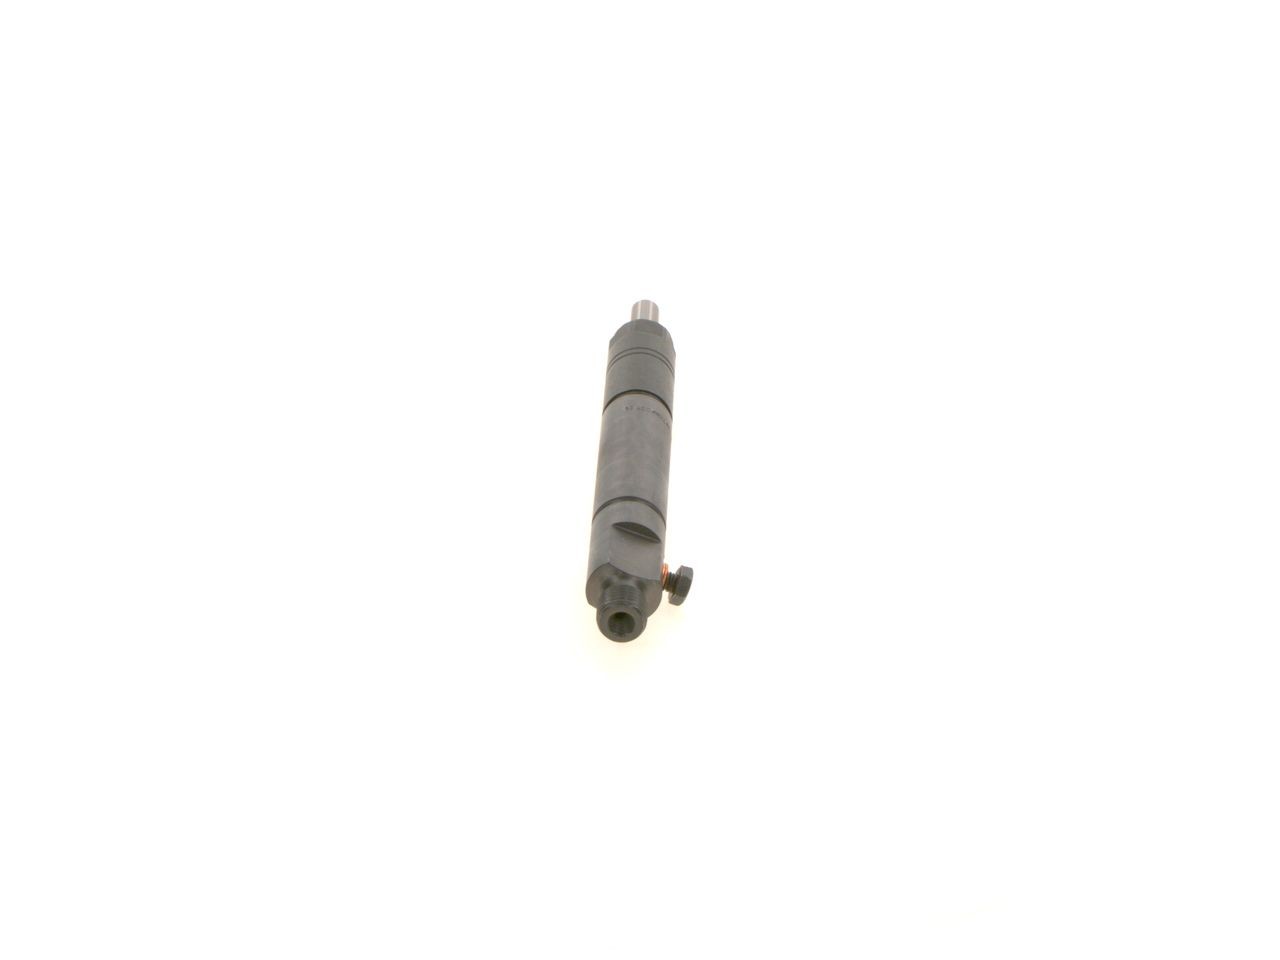 BOSCH 0432291580 Nozzle and Holder Assembly